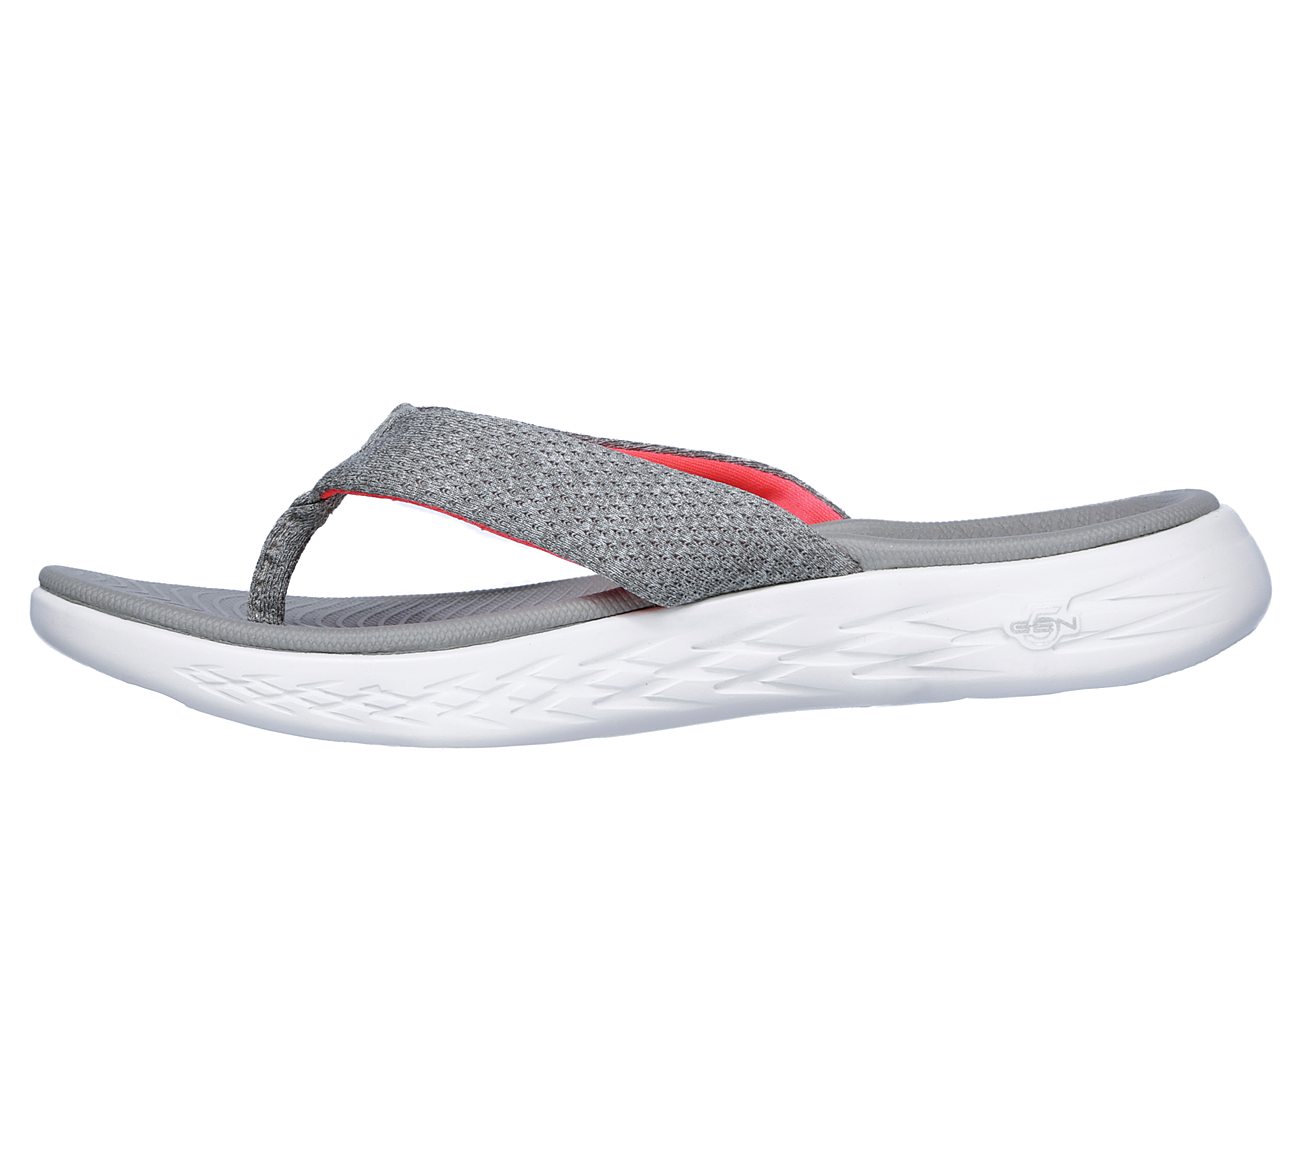 ON-THE-GO 600 - PREFERRED, GREY/PINK Footwear Left View